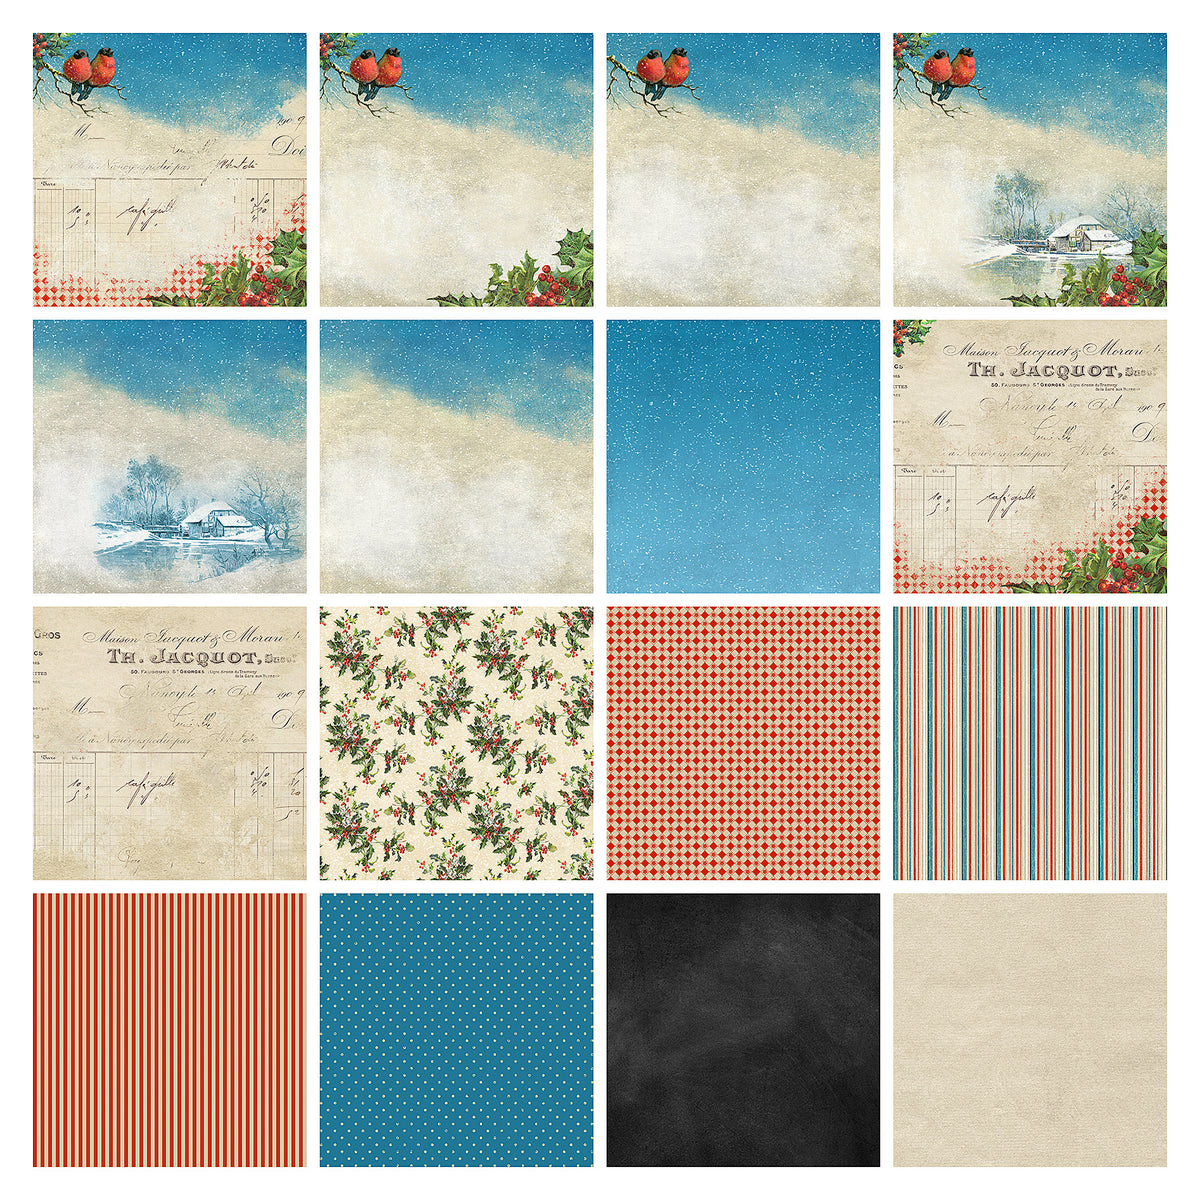 Winter Bullfinches Digital Papers featuring vintage illustrations and ephemera, holly and snow.